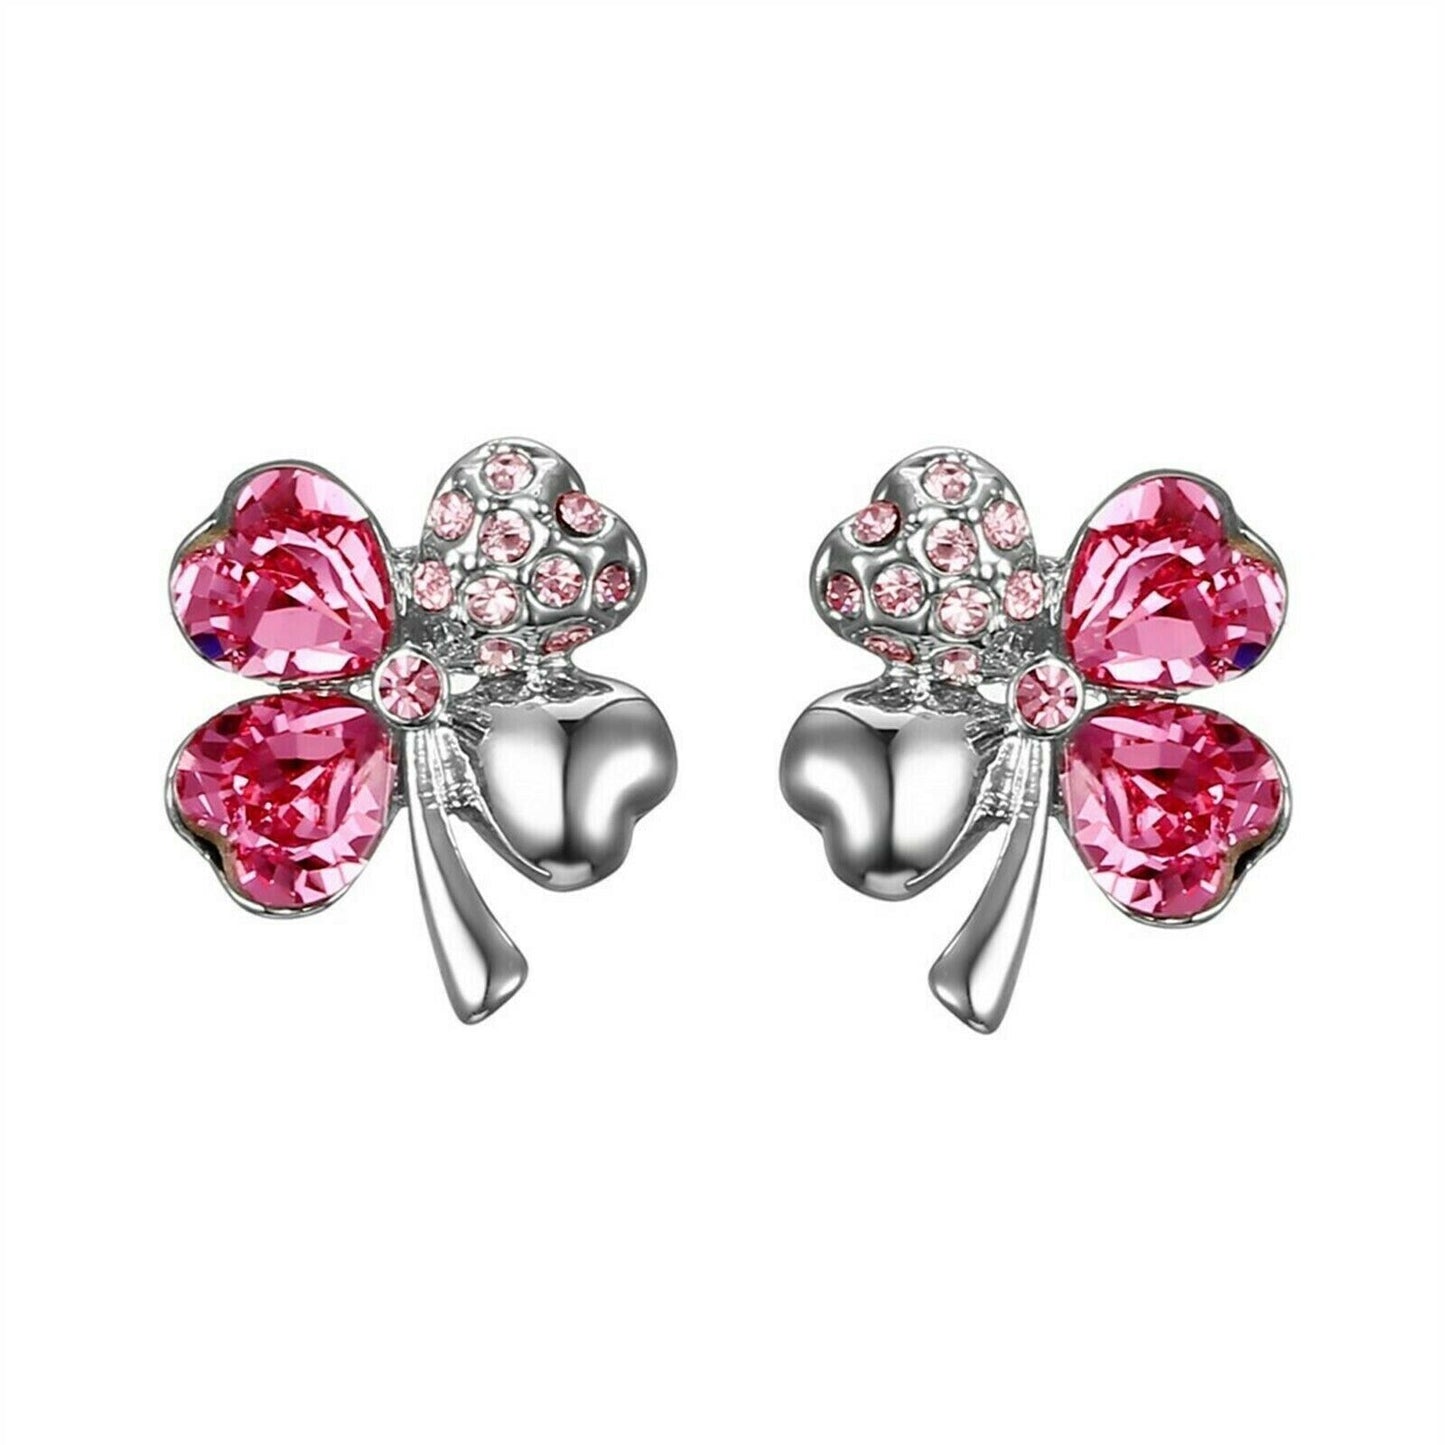 Shamrock Lucky Clover Heart Pink Jewel Stud Earrings - Made with Swarovski® Crystals